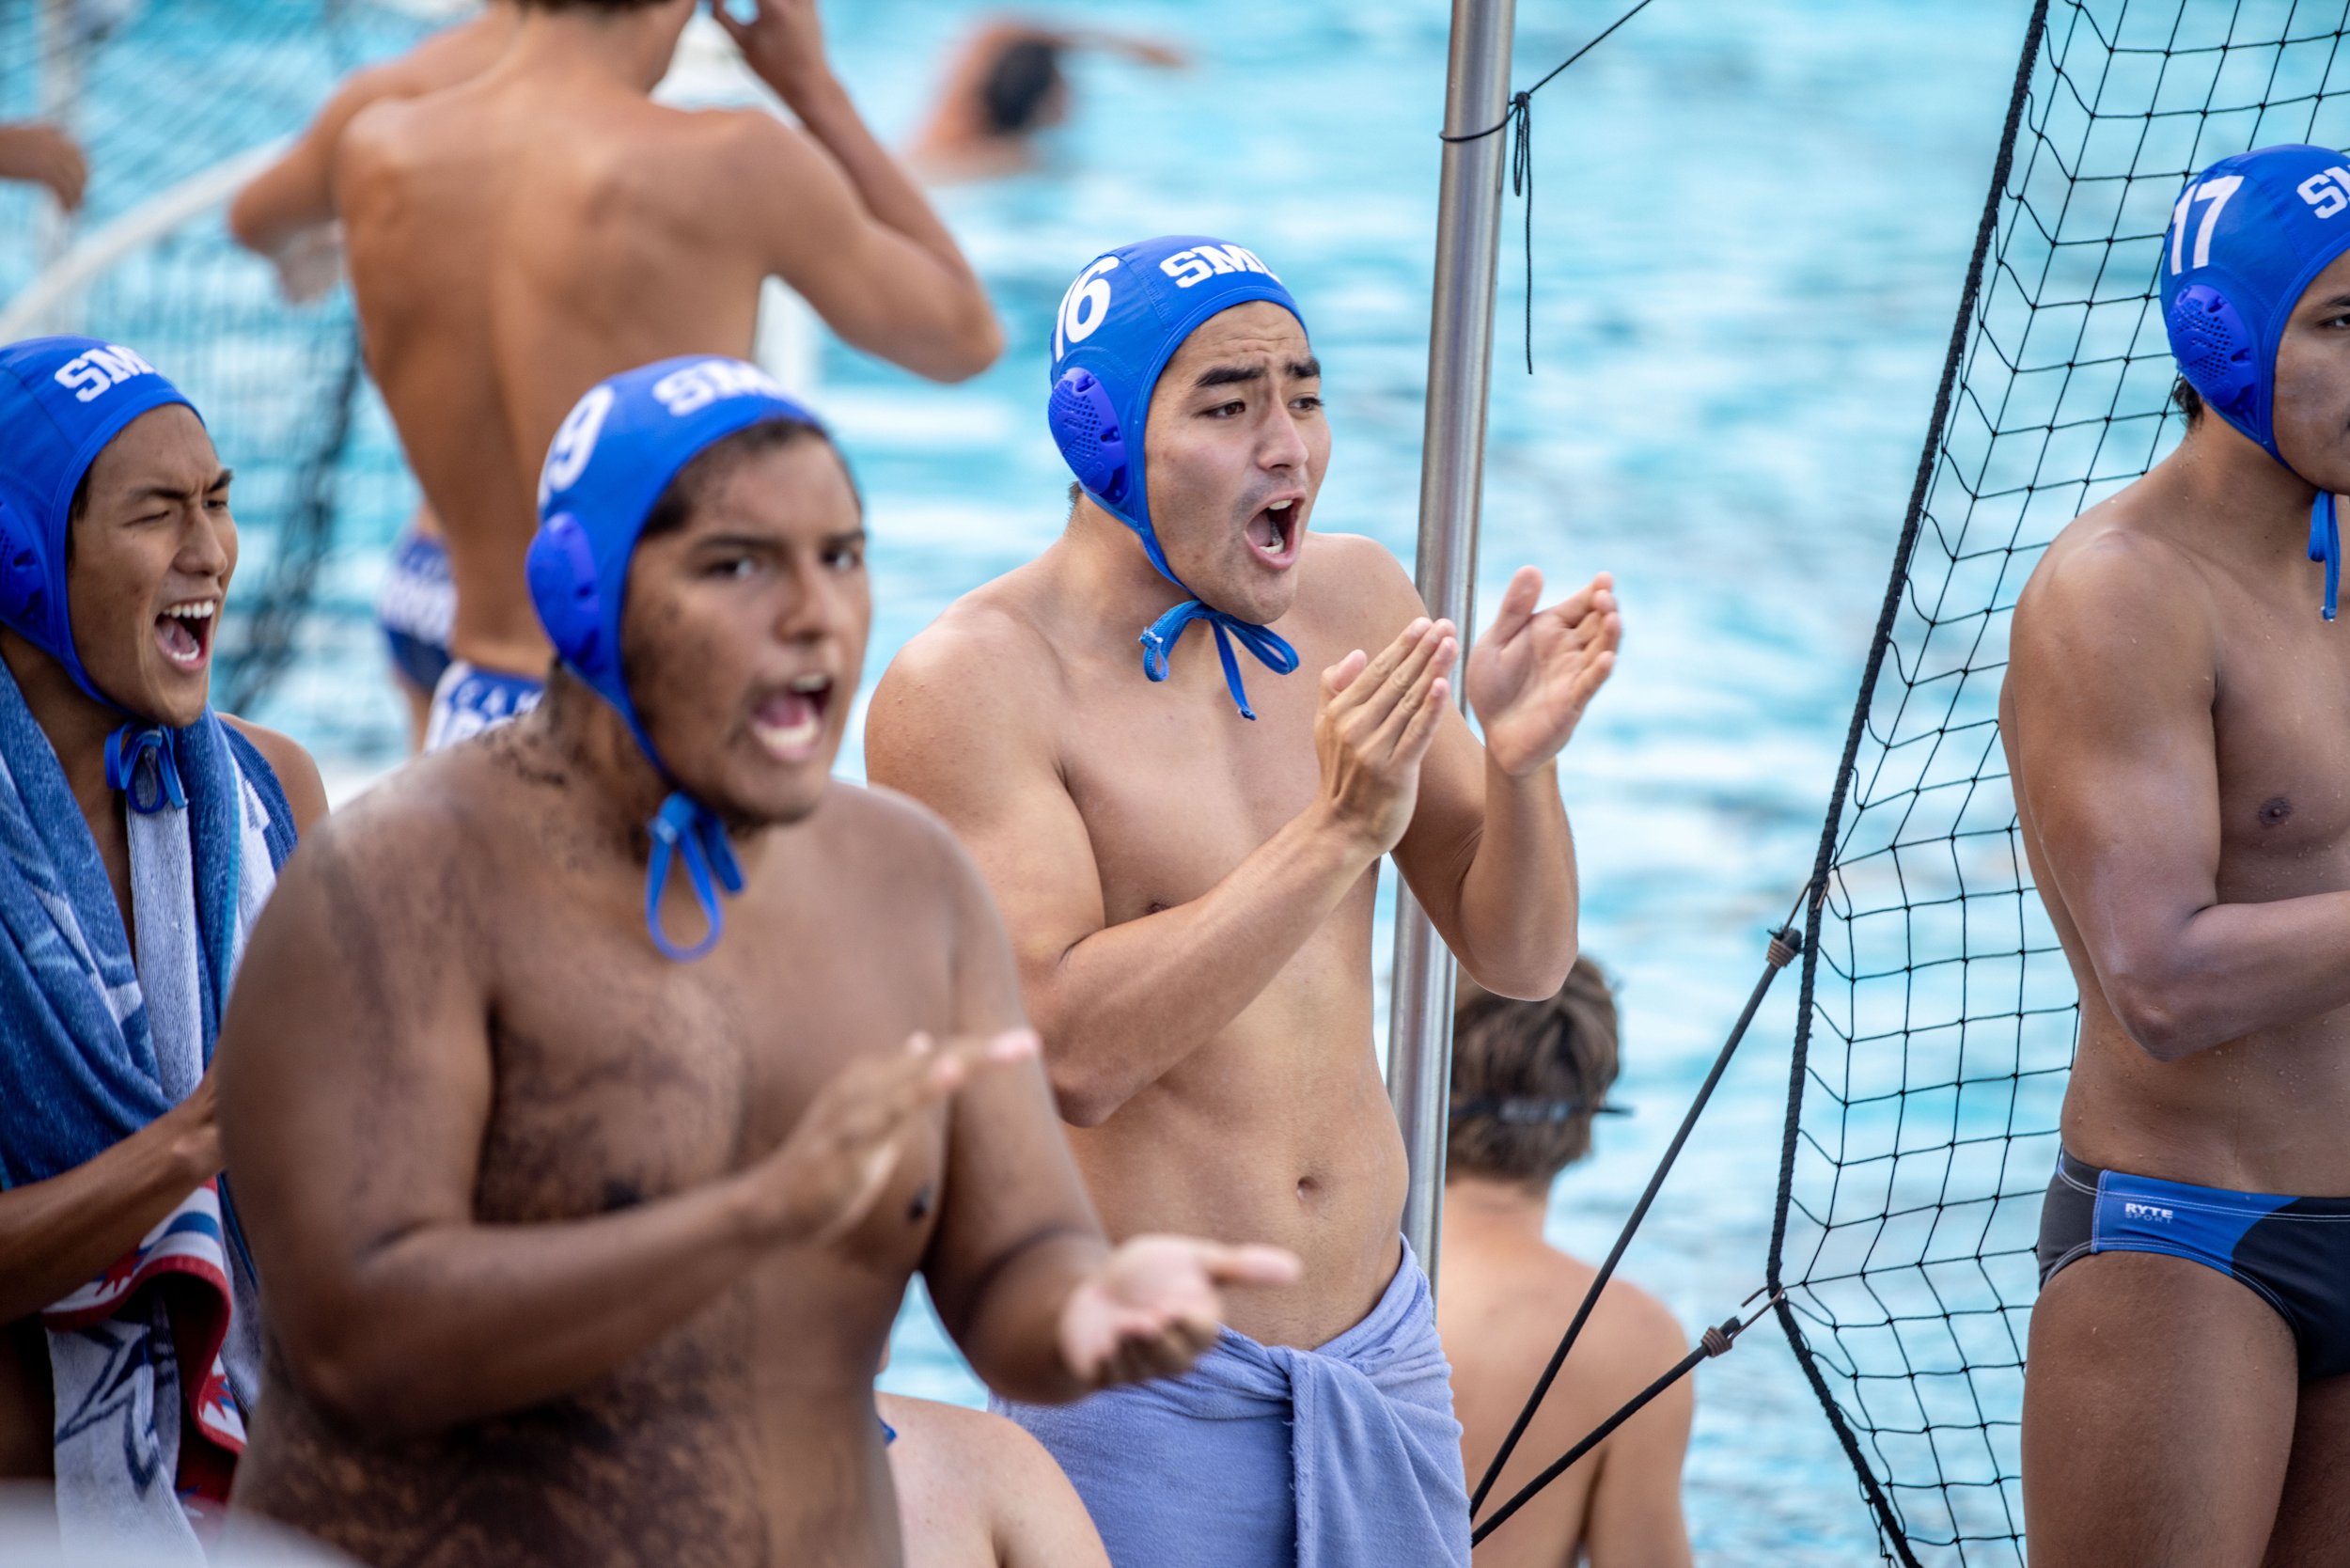  Santa Monica College players cheer during a waterpolo game against San Diego Mesa in Santa Monica, Calif., on Friday, Oct. 21, 2022. (Ethan Swope | The Corsair)   